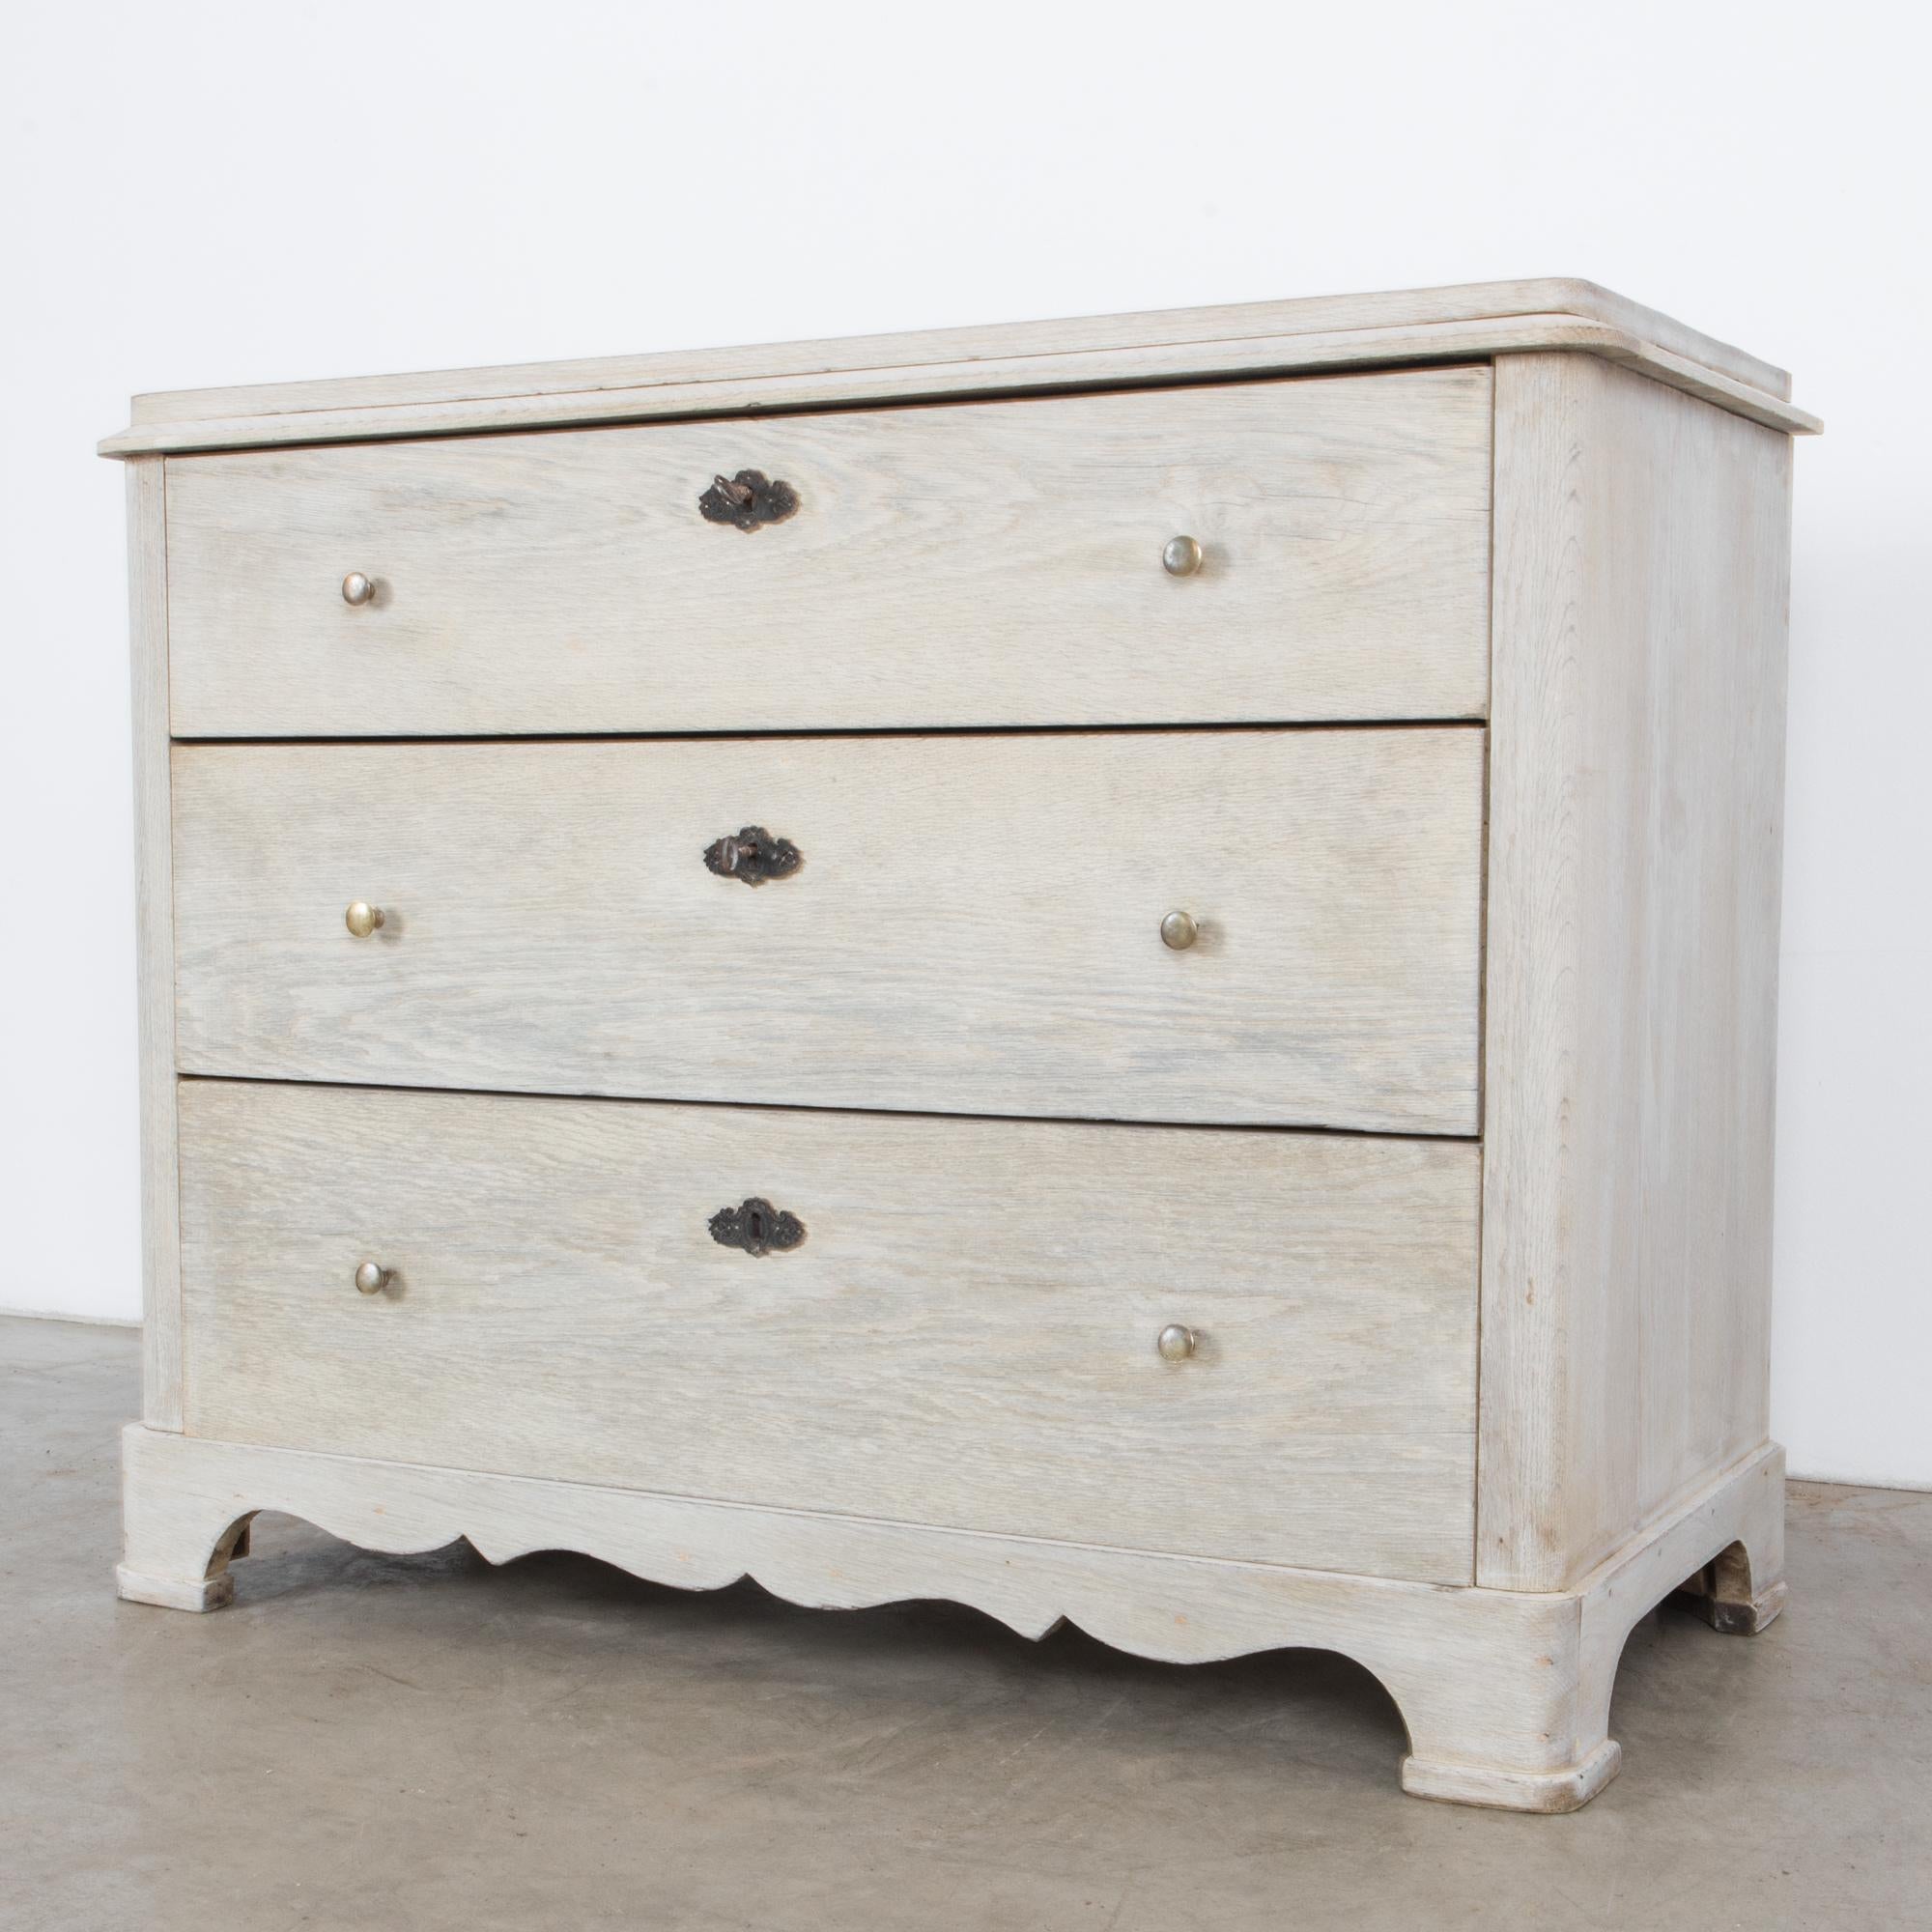 1880s Bleached Oak French Drawer Chest 1